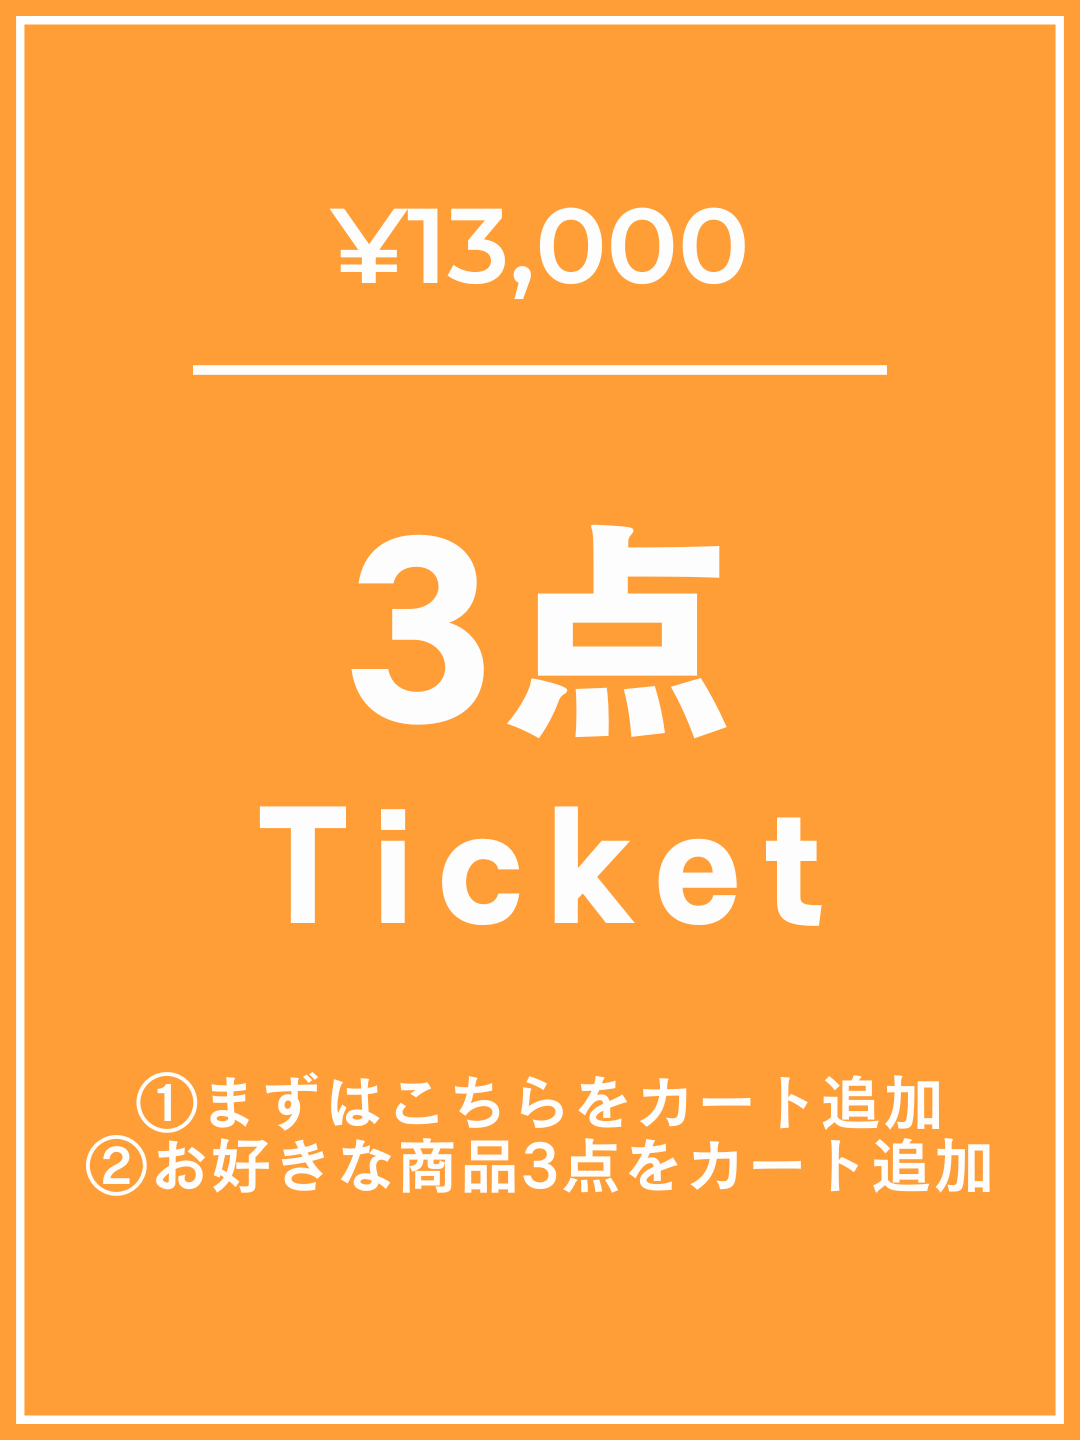 [Add this to your cart first] ¥13,000 ticket 